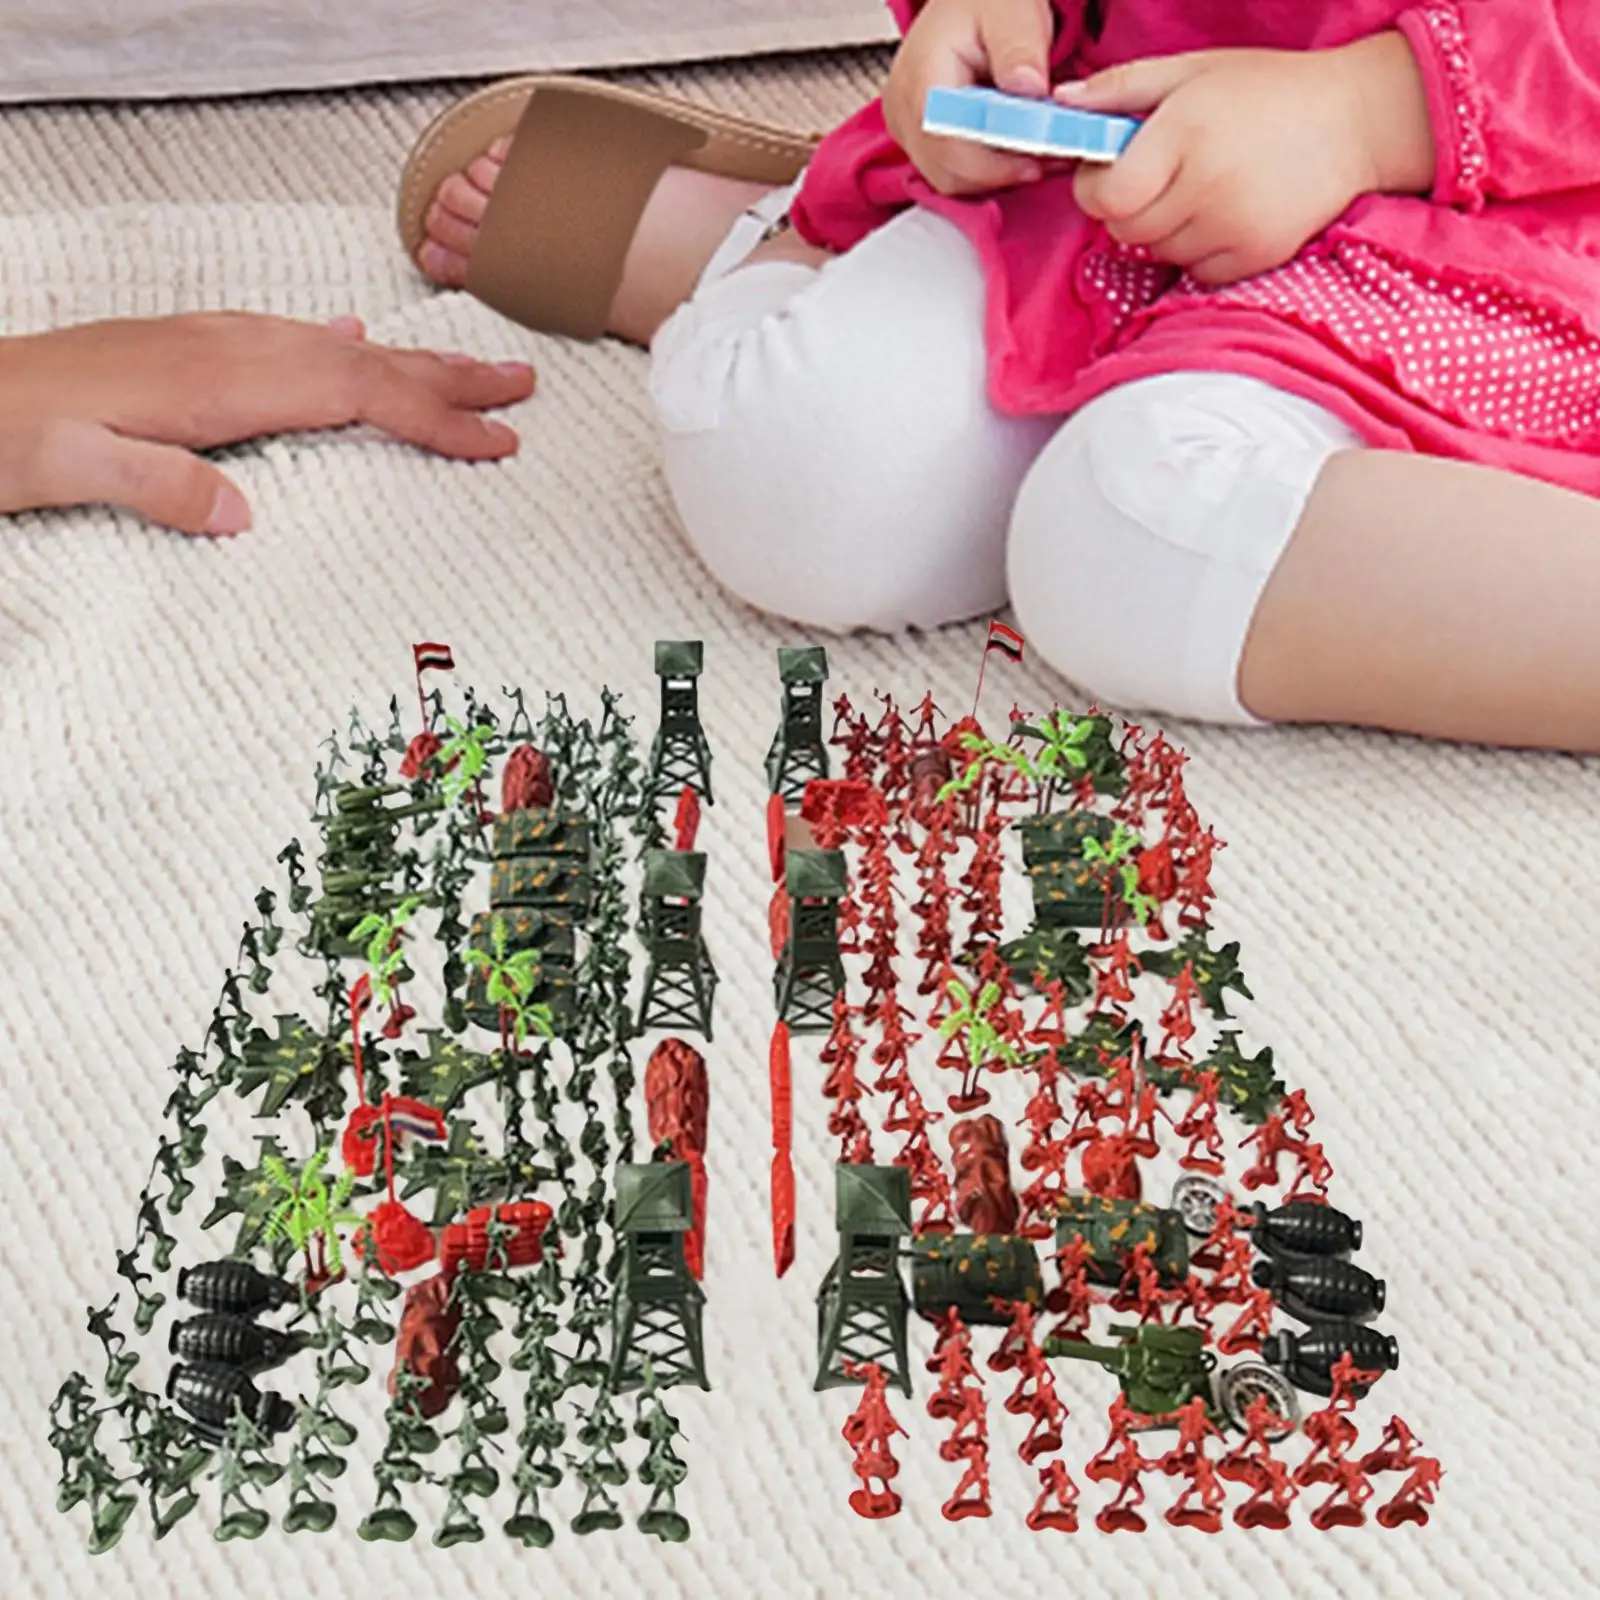 300 Pieces Miniature Soldier Tank Set Decorative 4cm Gifts Multipurpose Collection Toy for Role Playing Layout Props Adults Kids